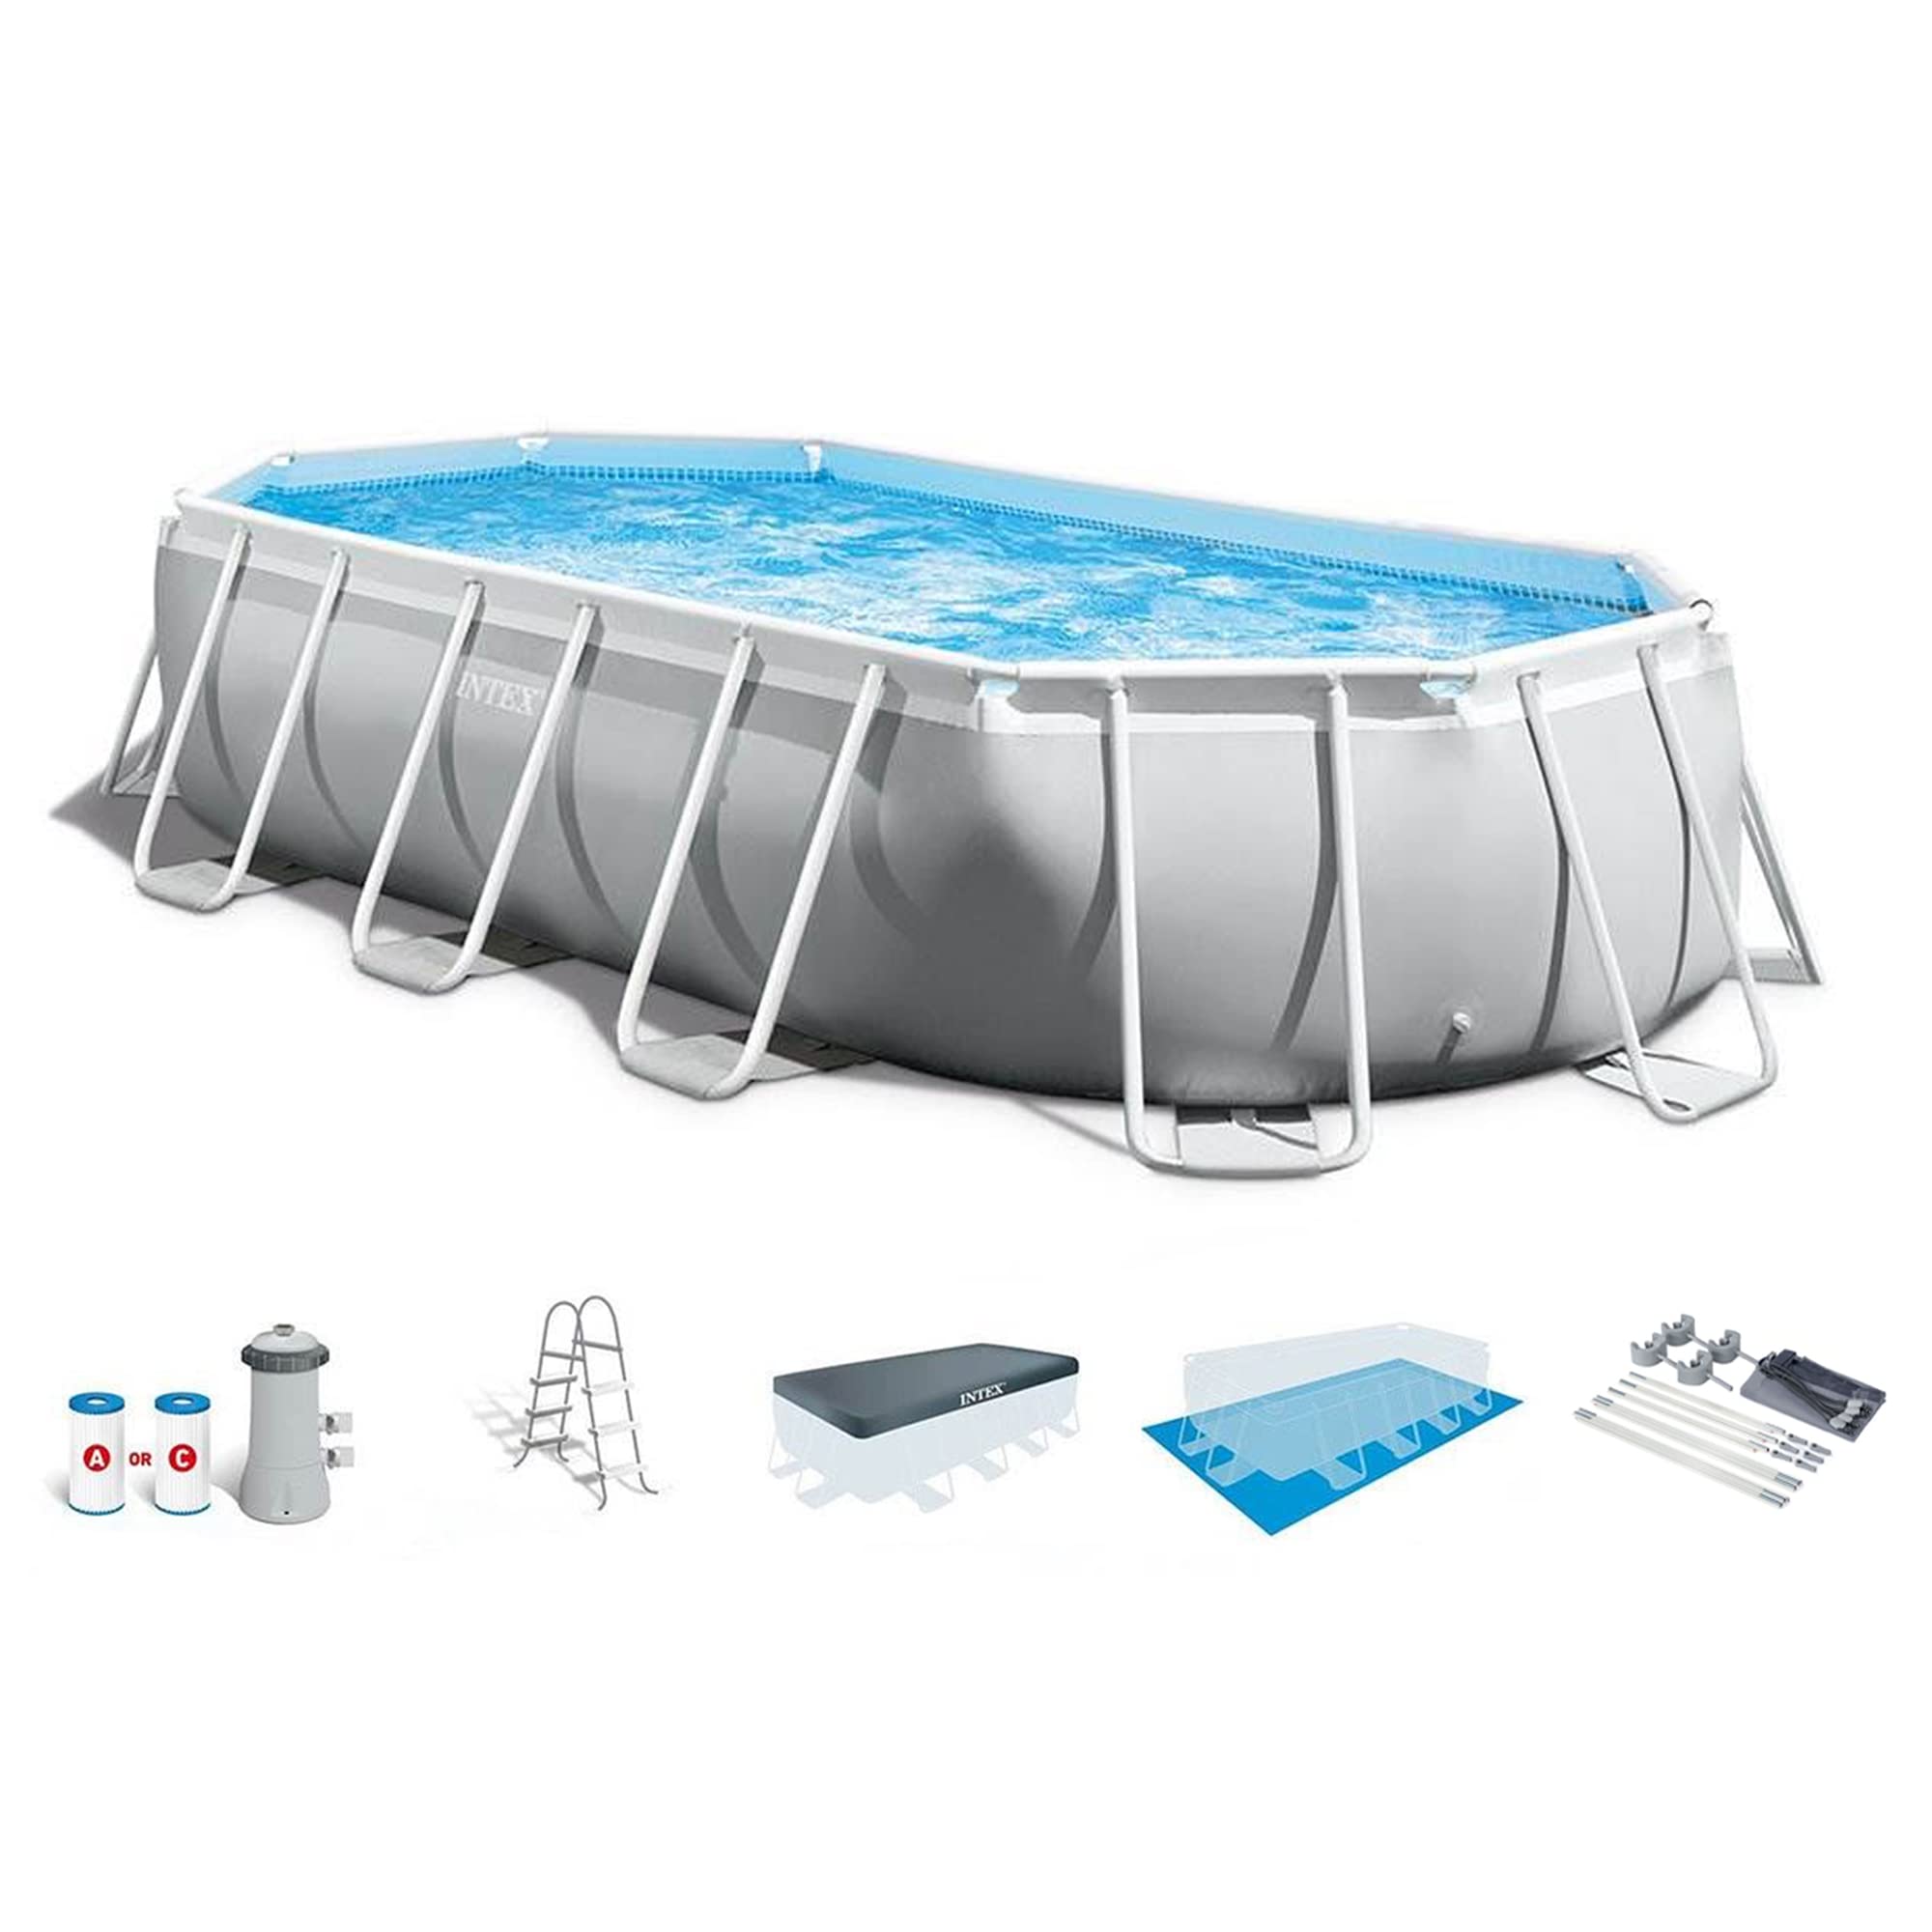 Intex Prism Frame 16.5' x 9' x 4' Oval Above Ground Swimming Pool Set